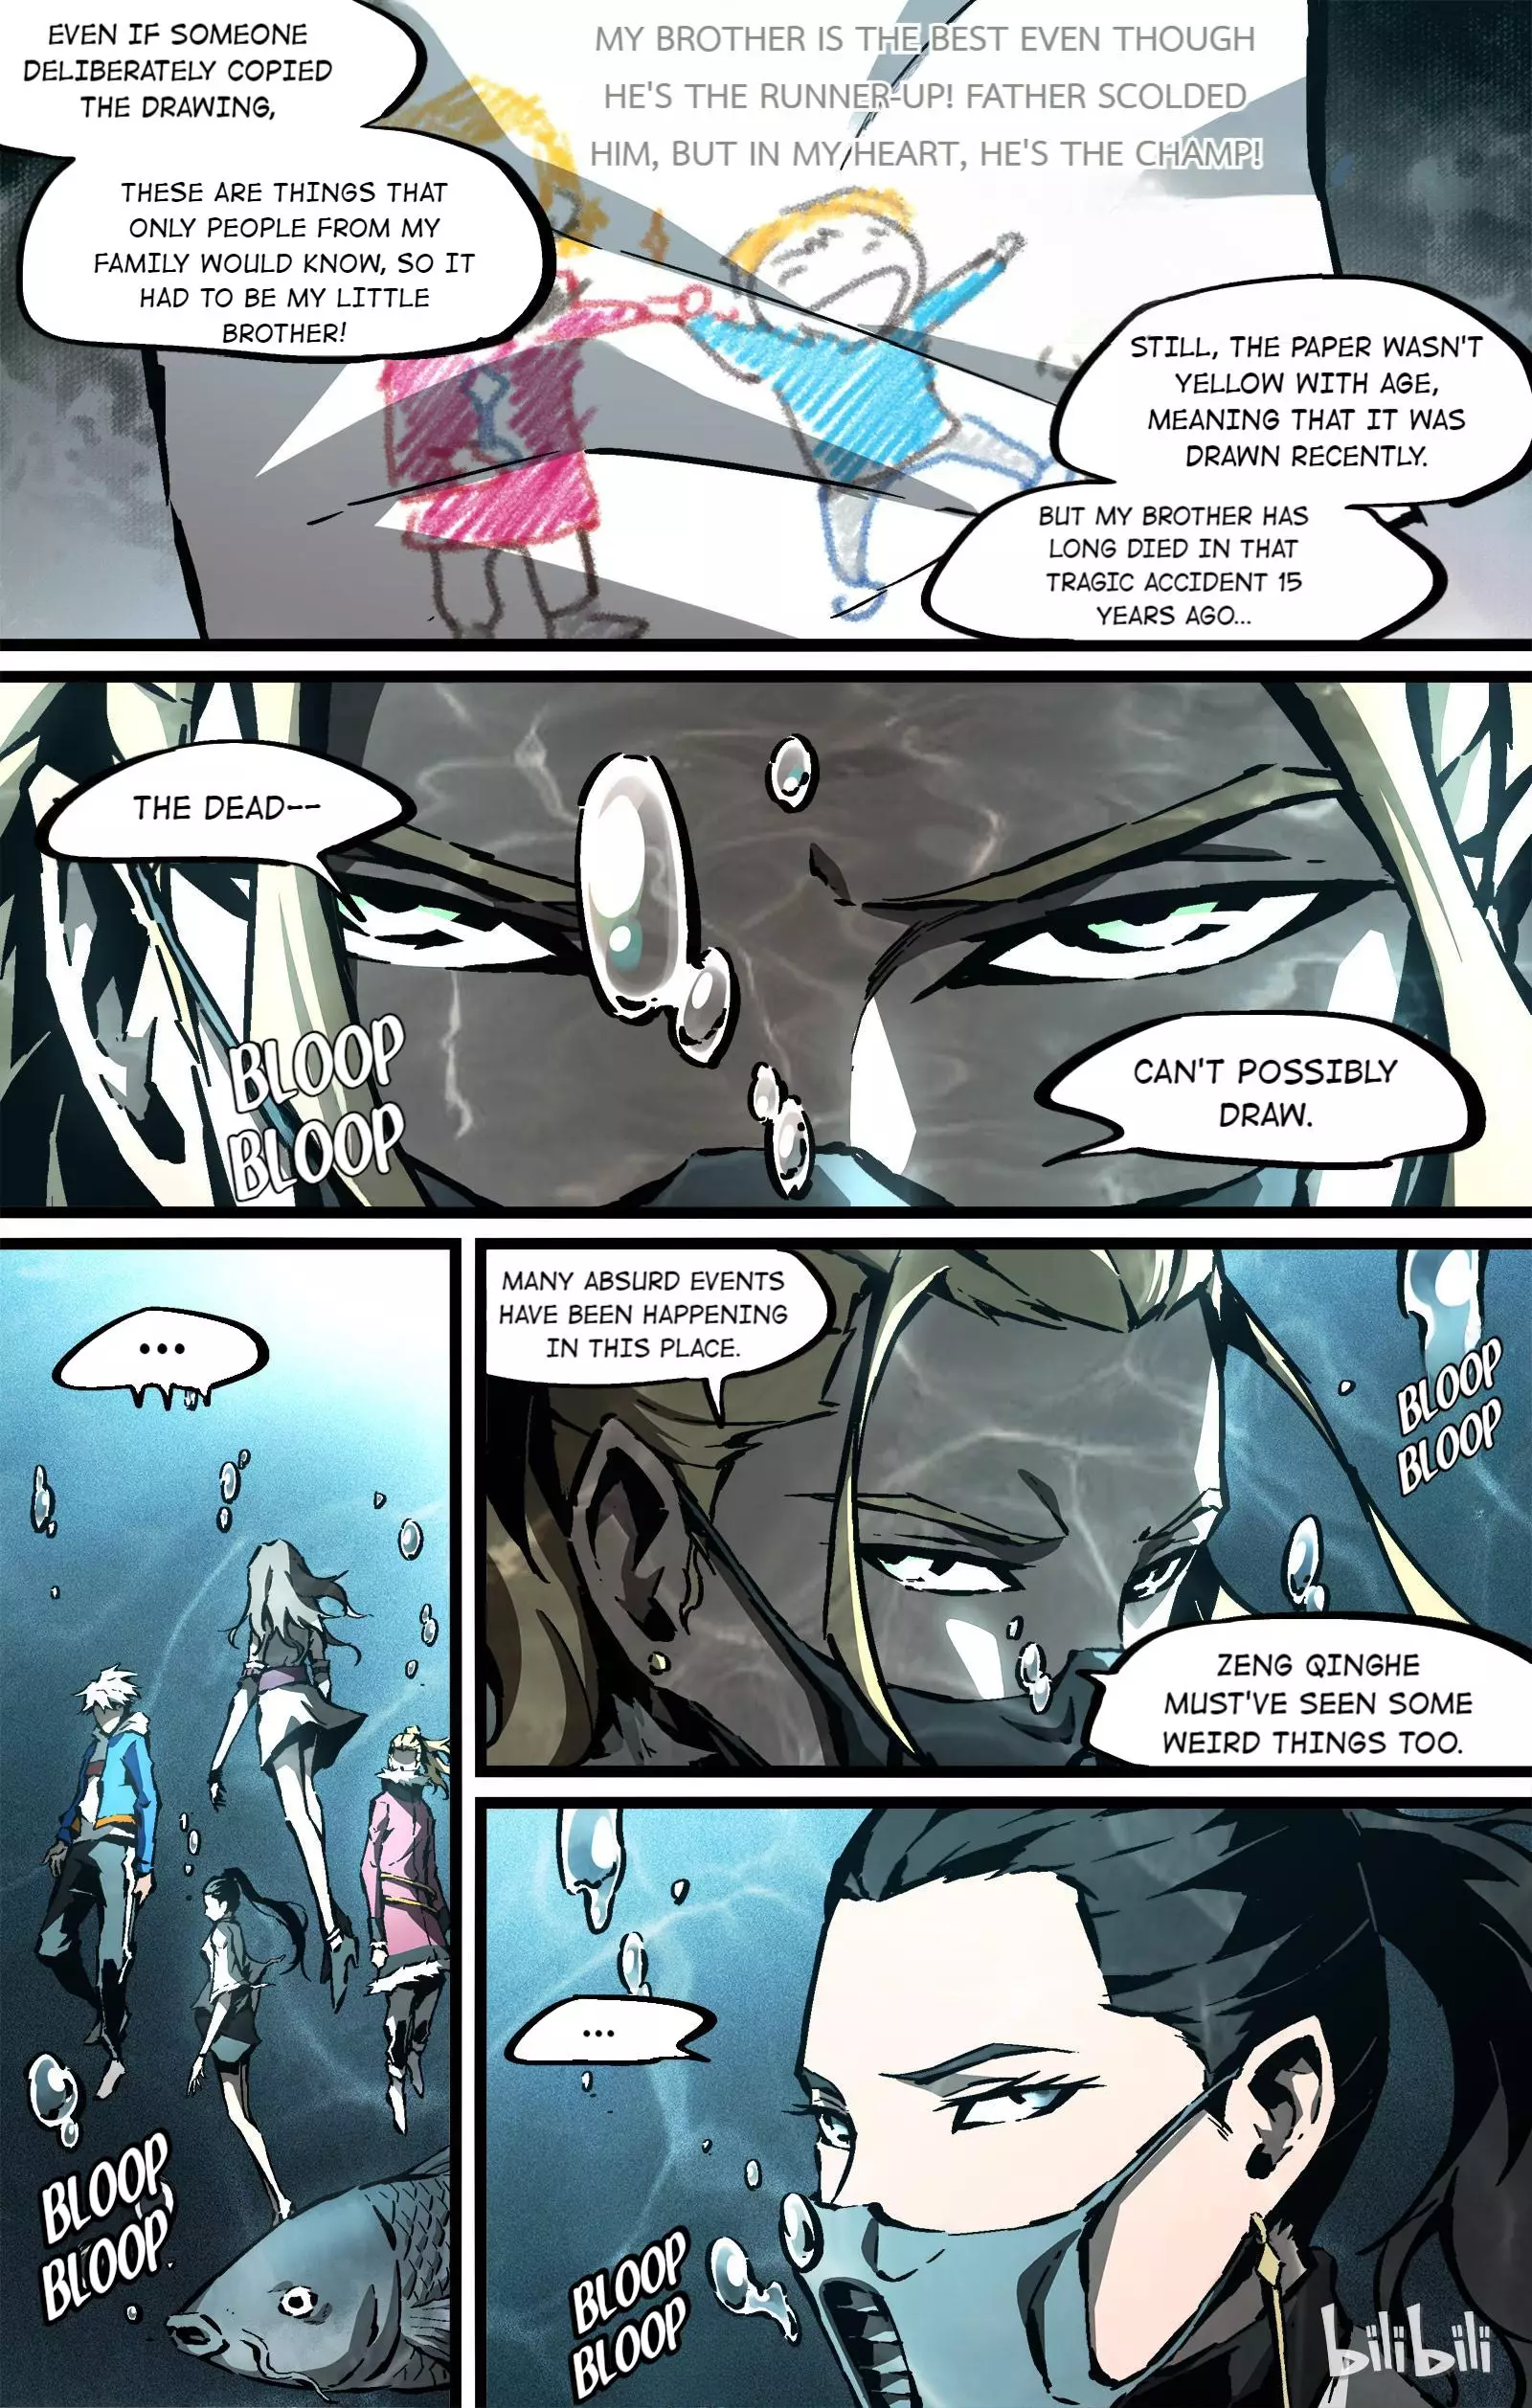 Outlaws - 68 page 7-85cf8b08